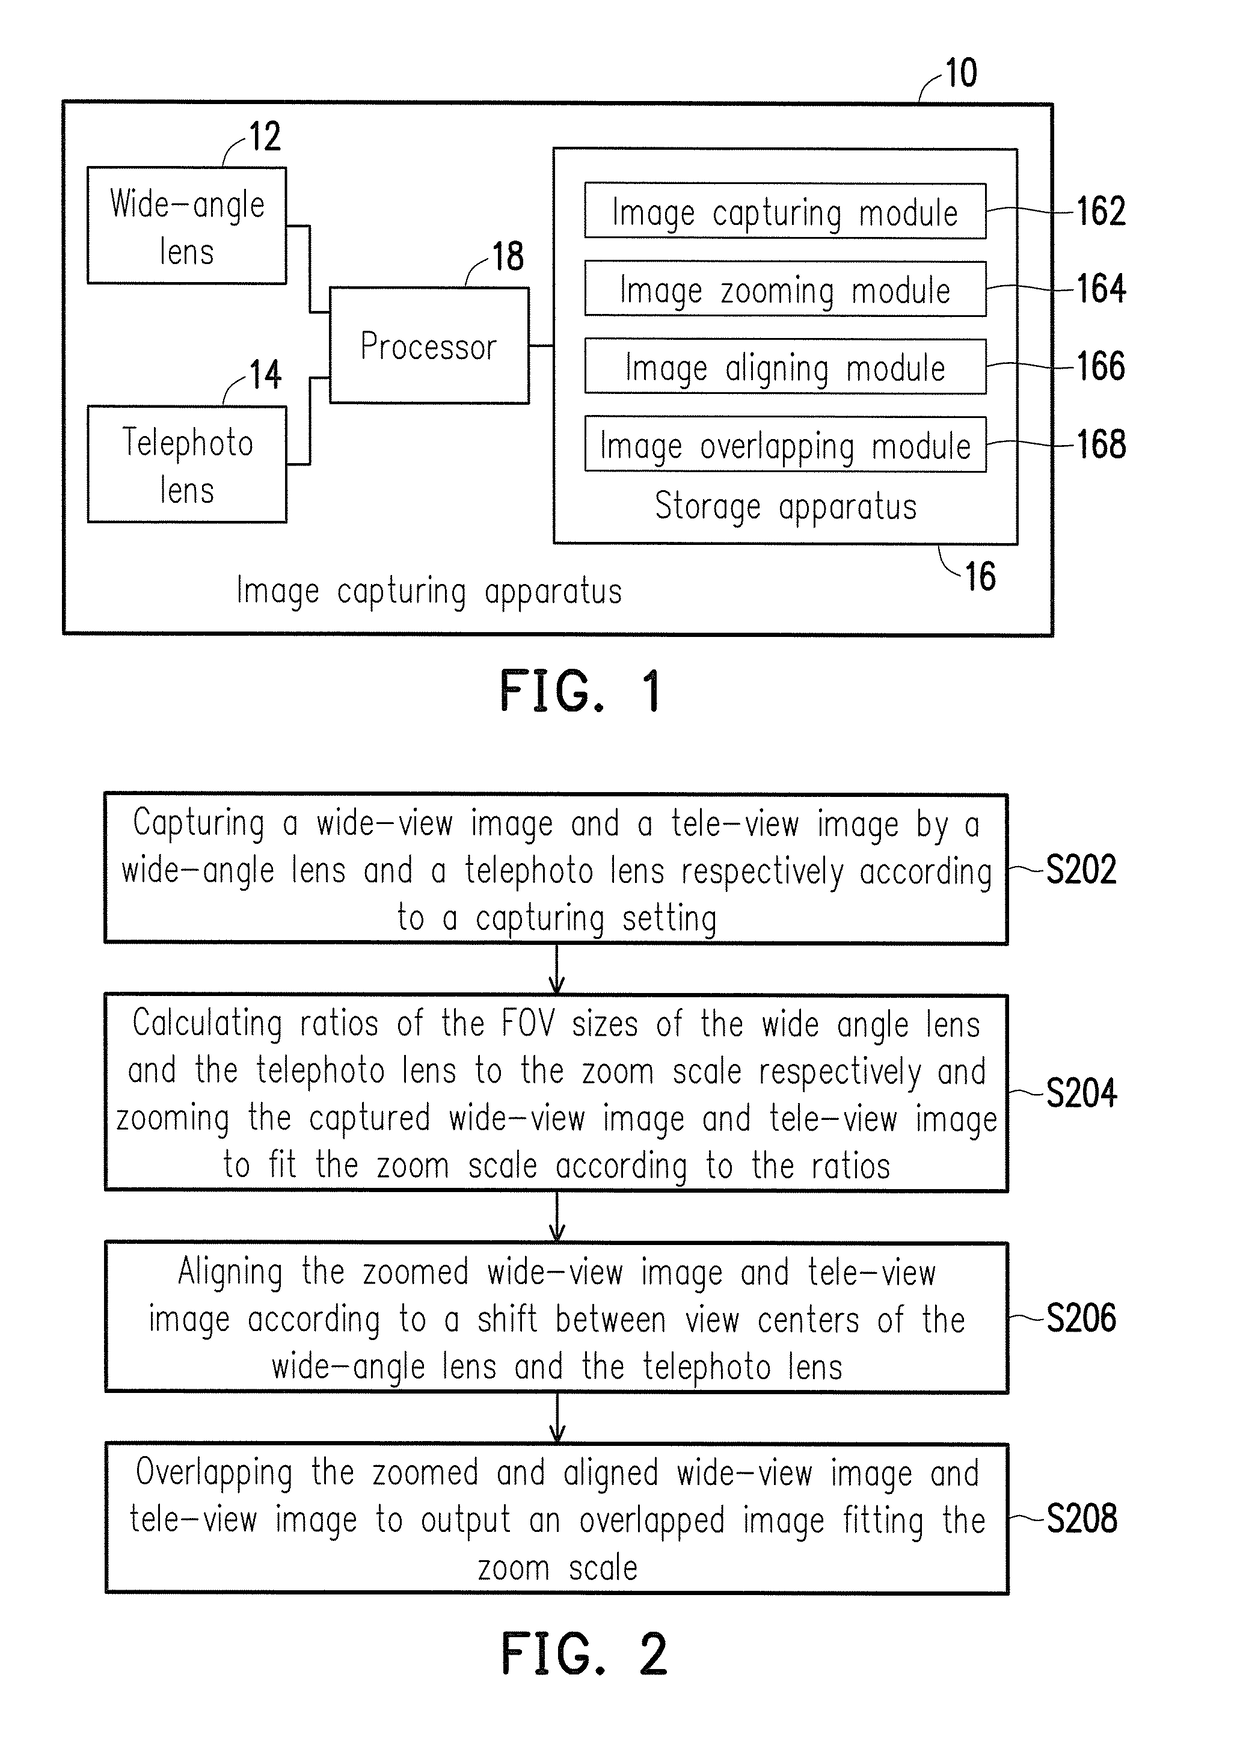 Image capturing apparatus and image smooth zooming method thereof